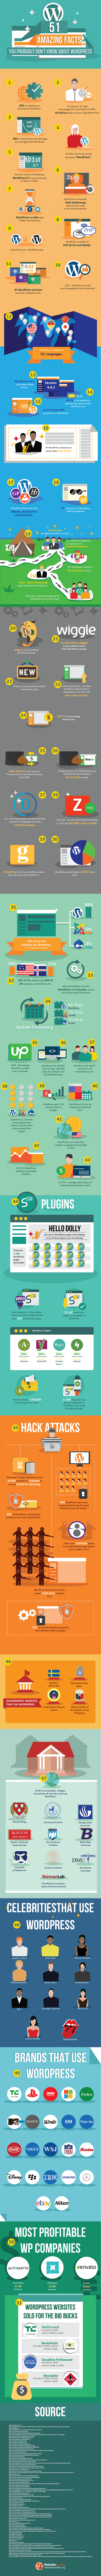 51 Amazing Facts about WordPress – infographic